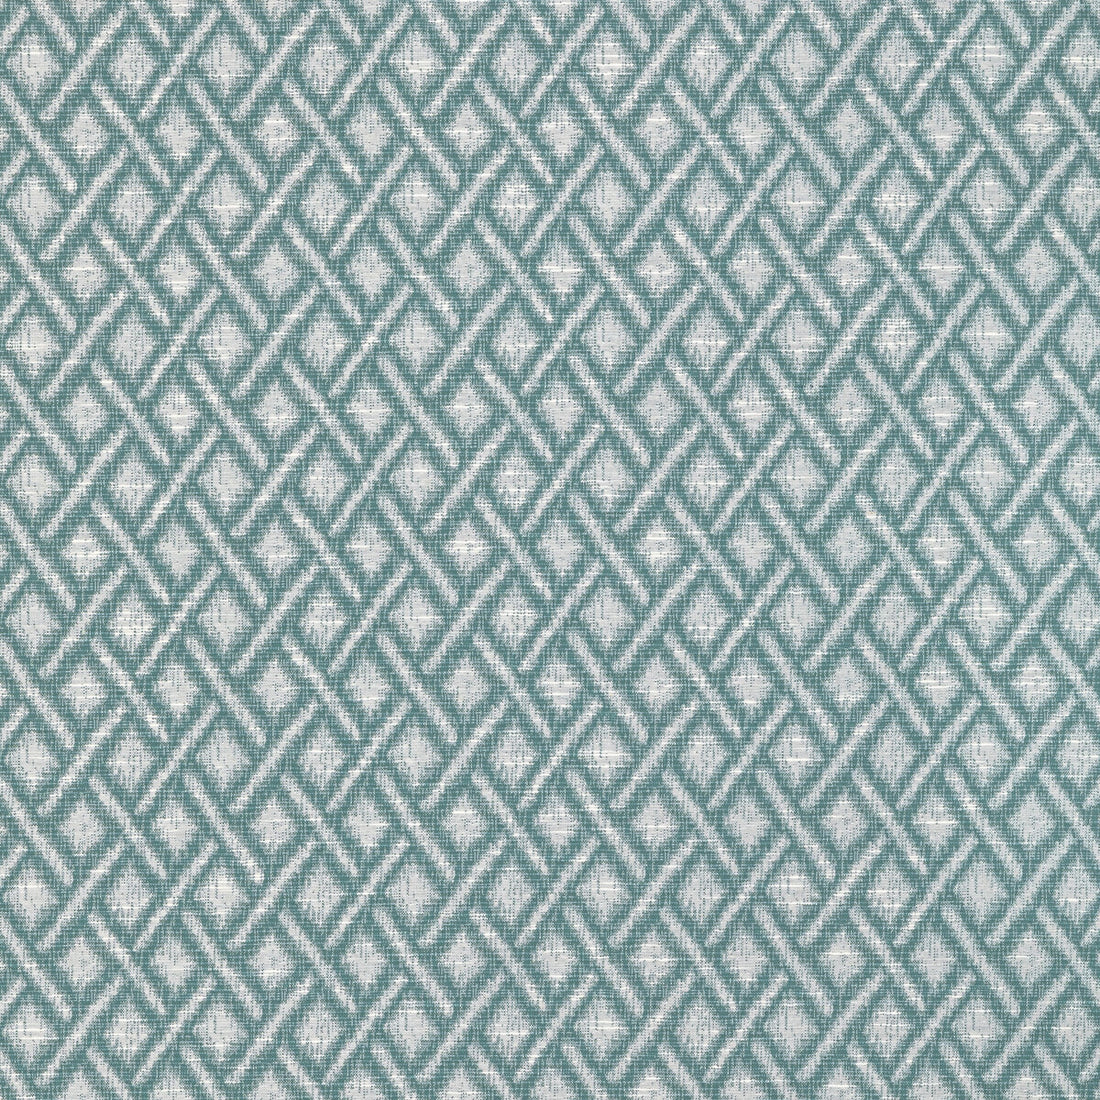 Cass fabric in teal color - pattern 36595.135.0 - by Kravet Basics